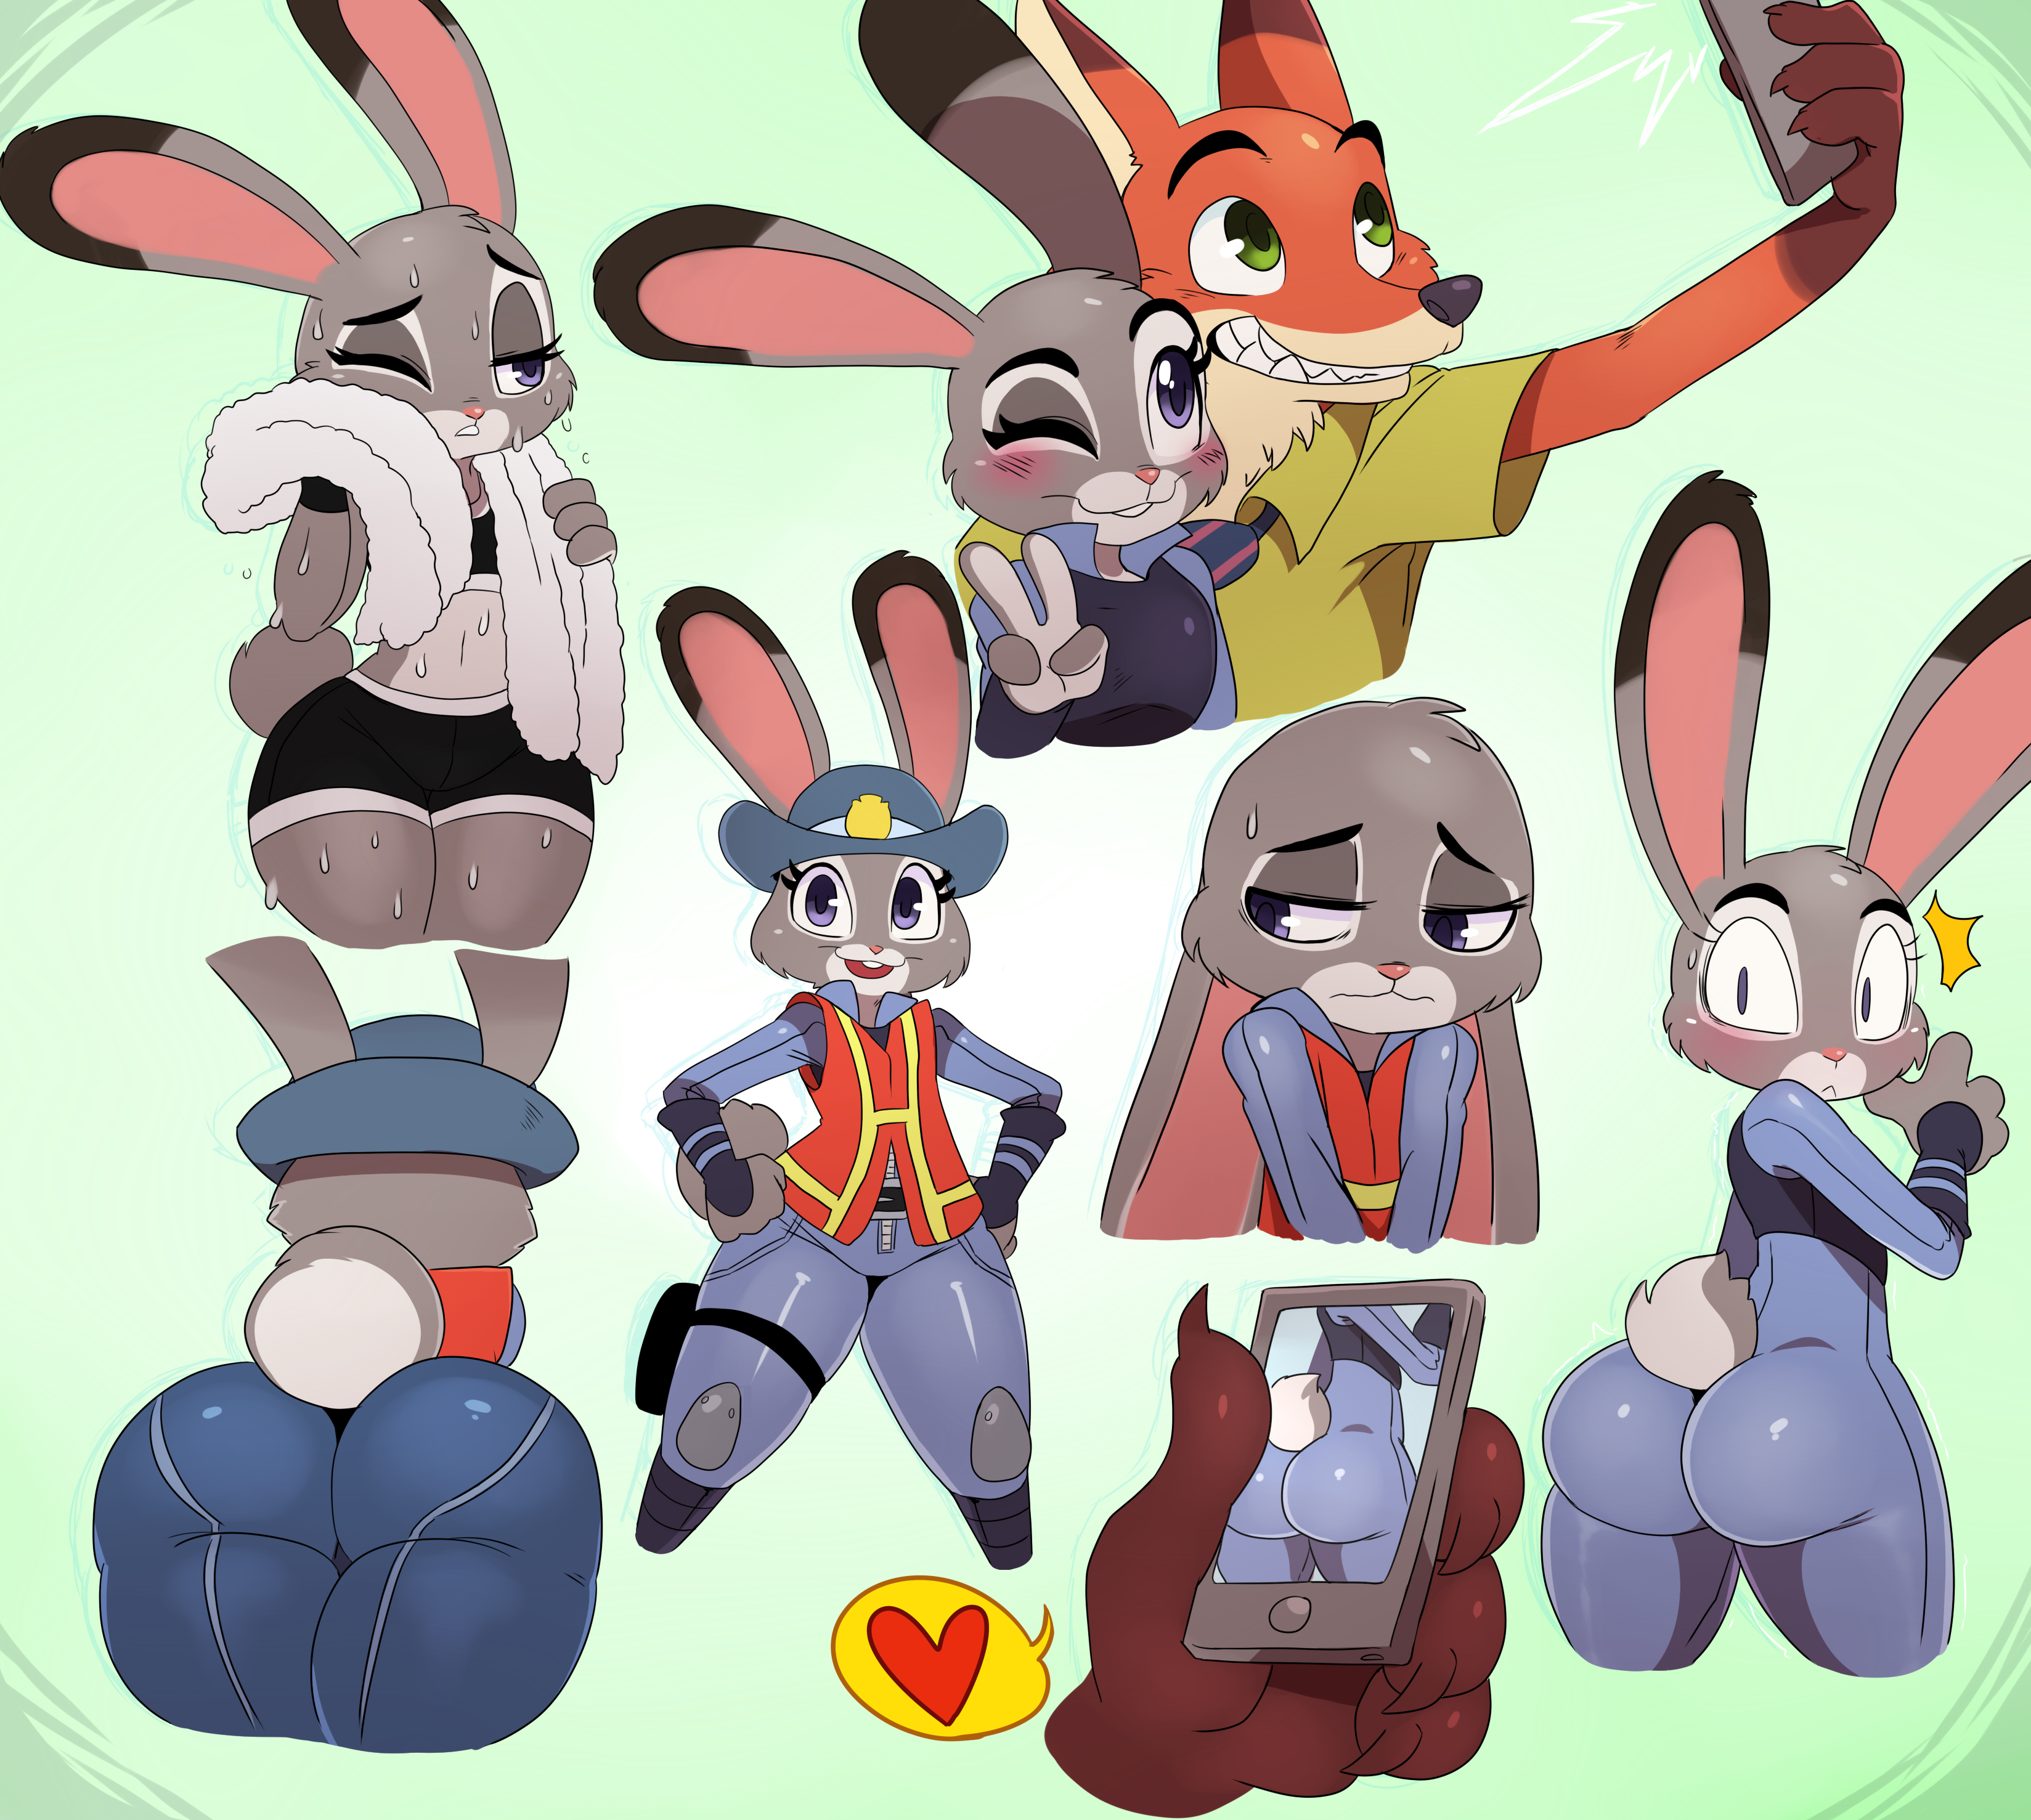 Zootopia Judy Hopps Porn UPDATED: April 25th BLVCKVVIDOW.